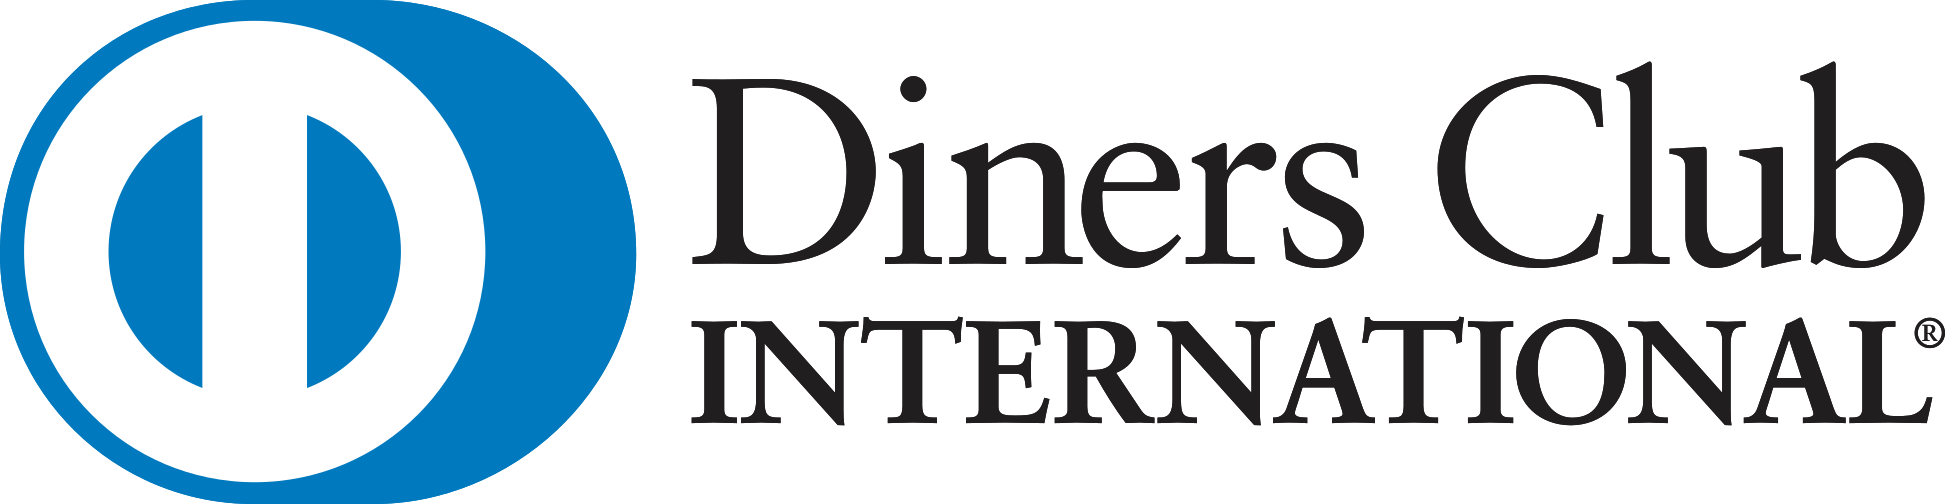 Diners Club Eaccount News